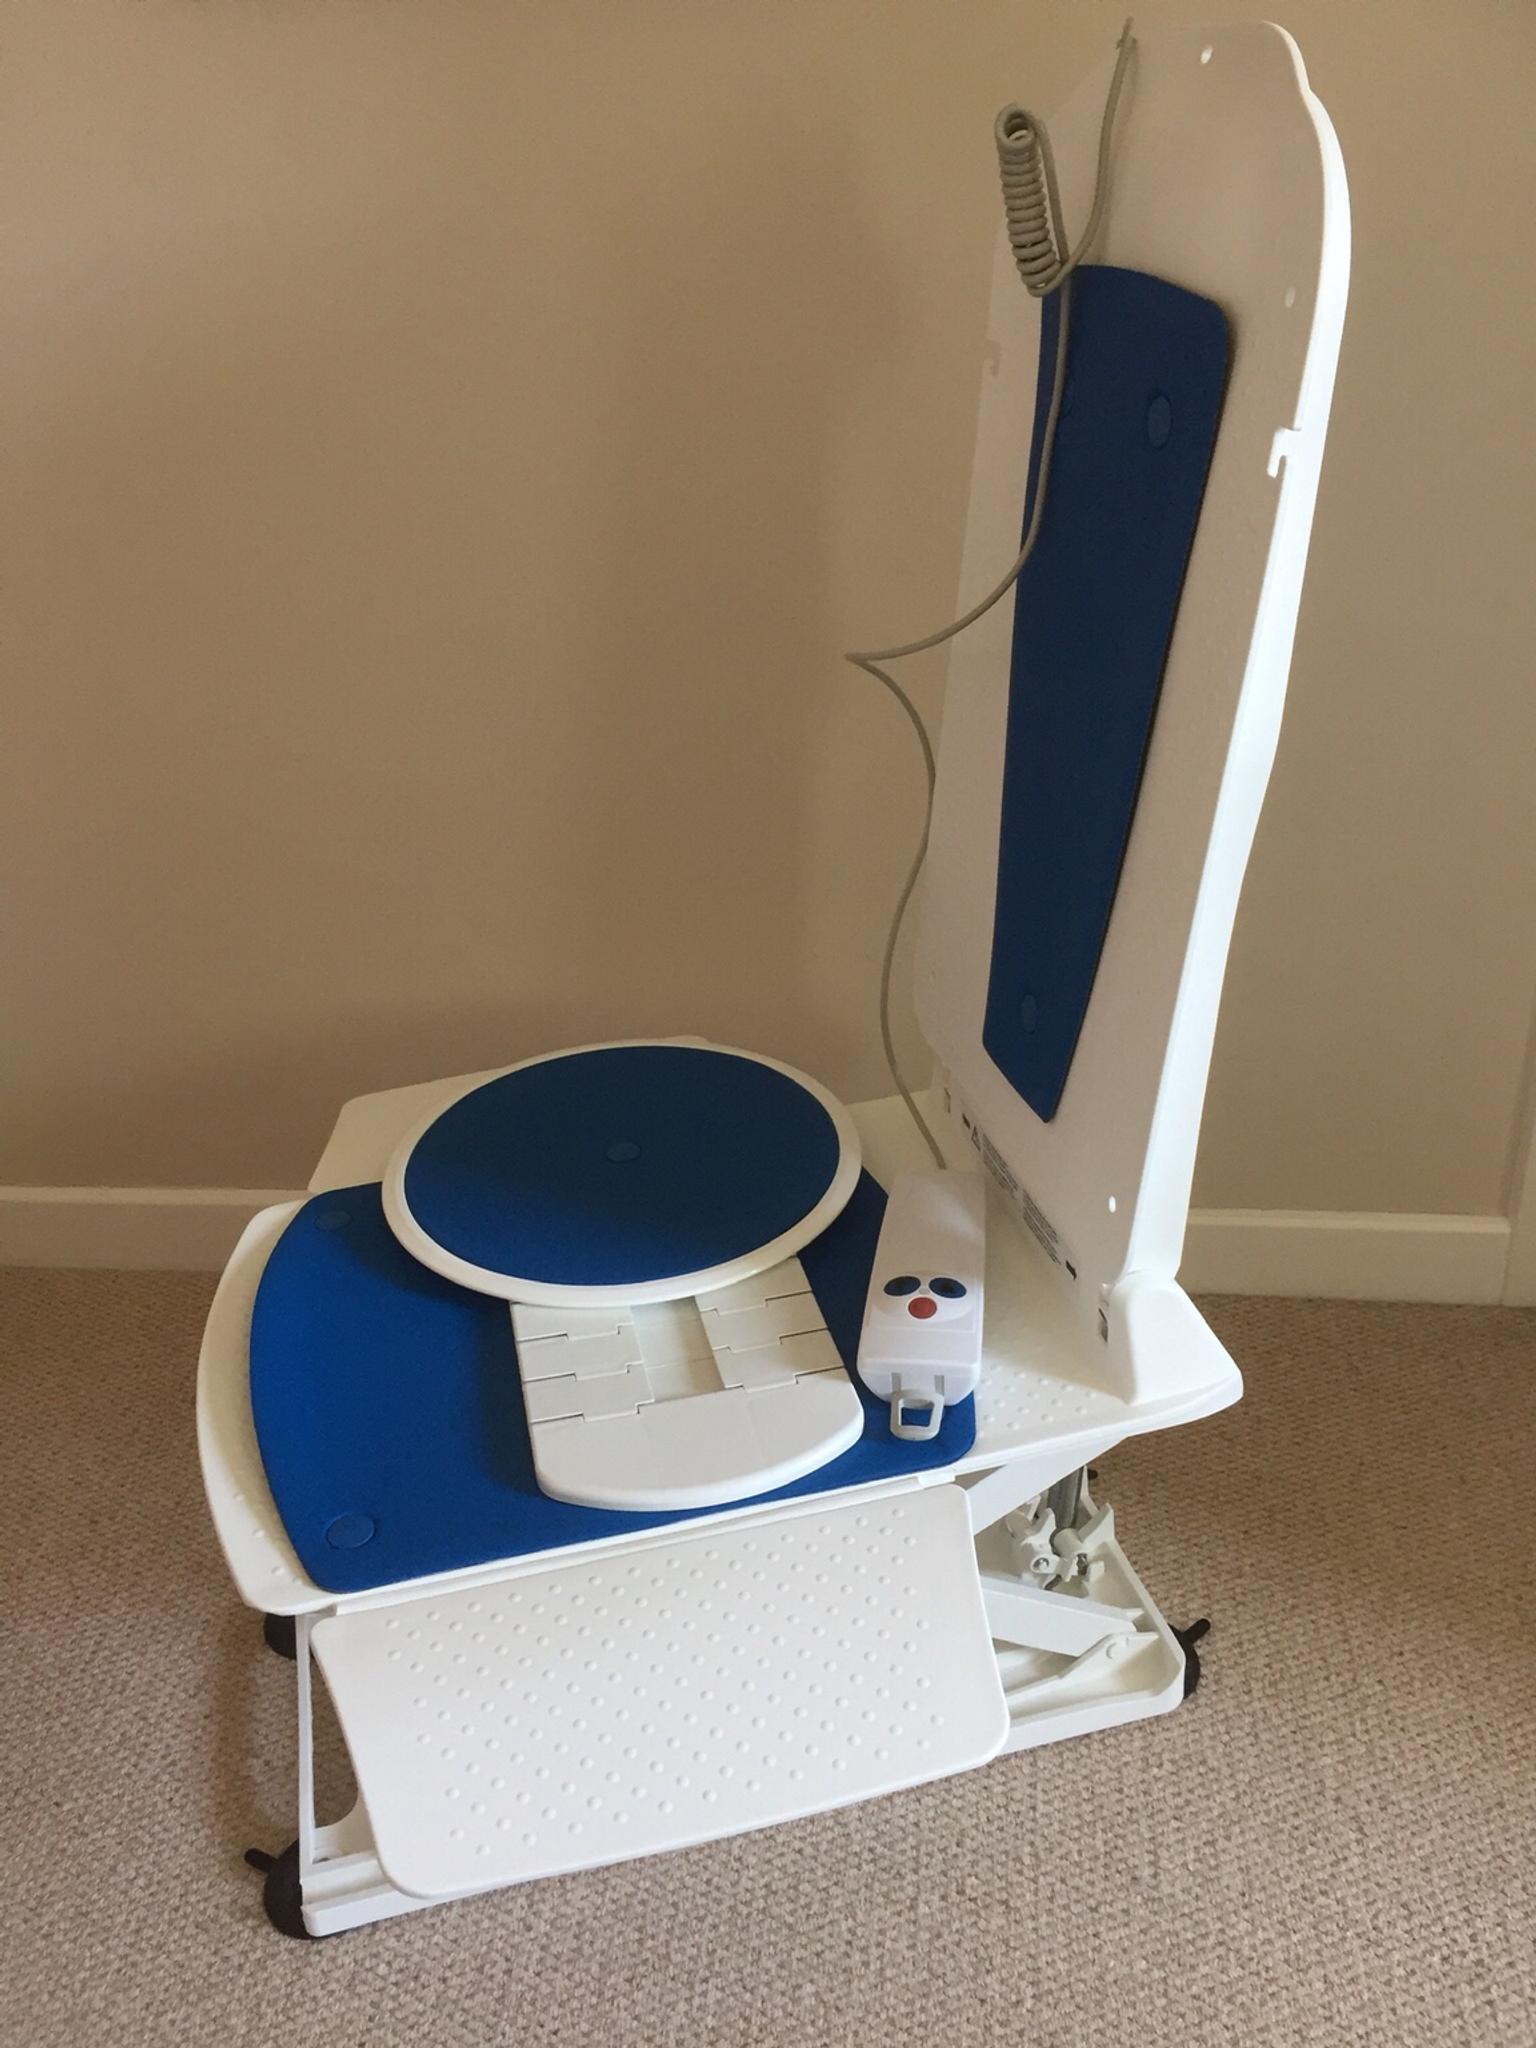 Bath Lift Chair In Hinckley And Bosworth For 99 00 For Sale Shpock